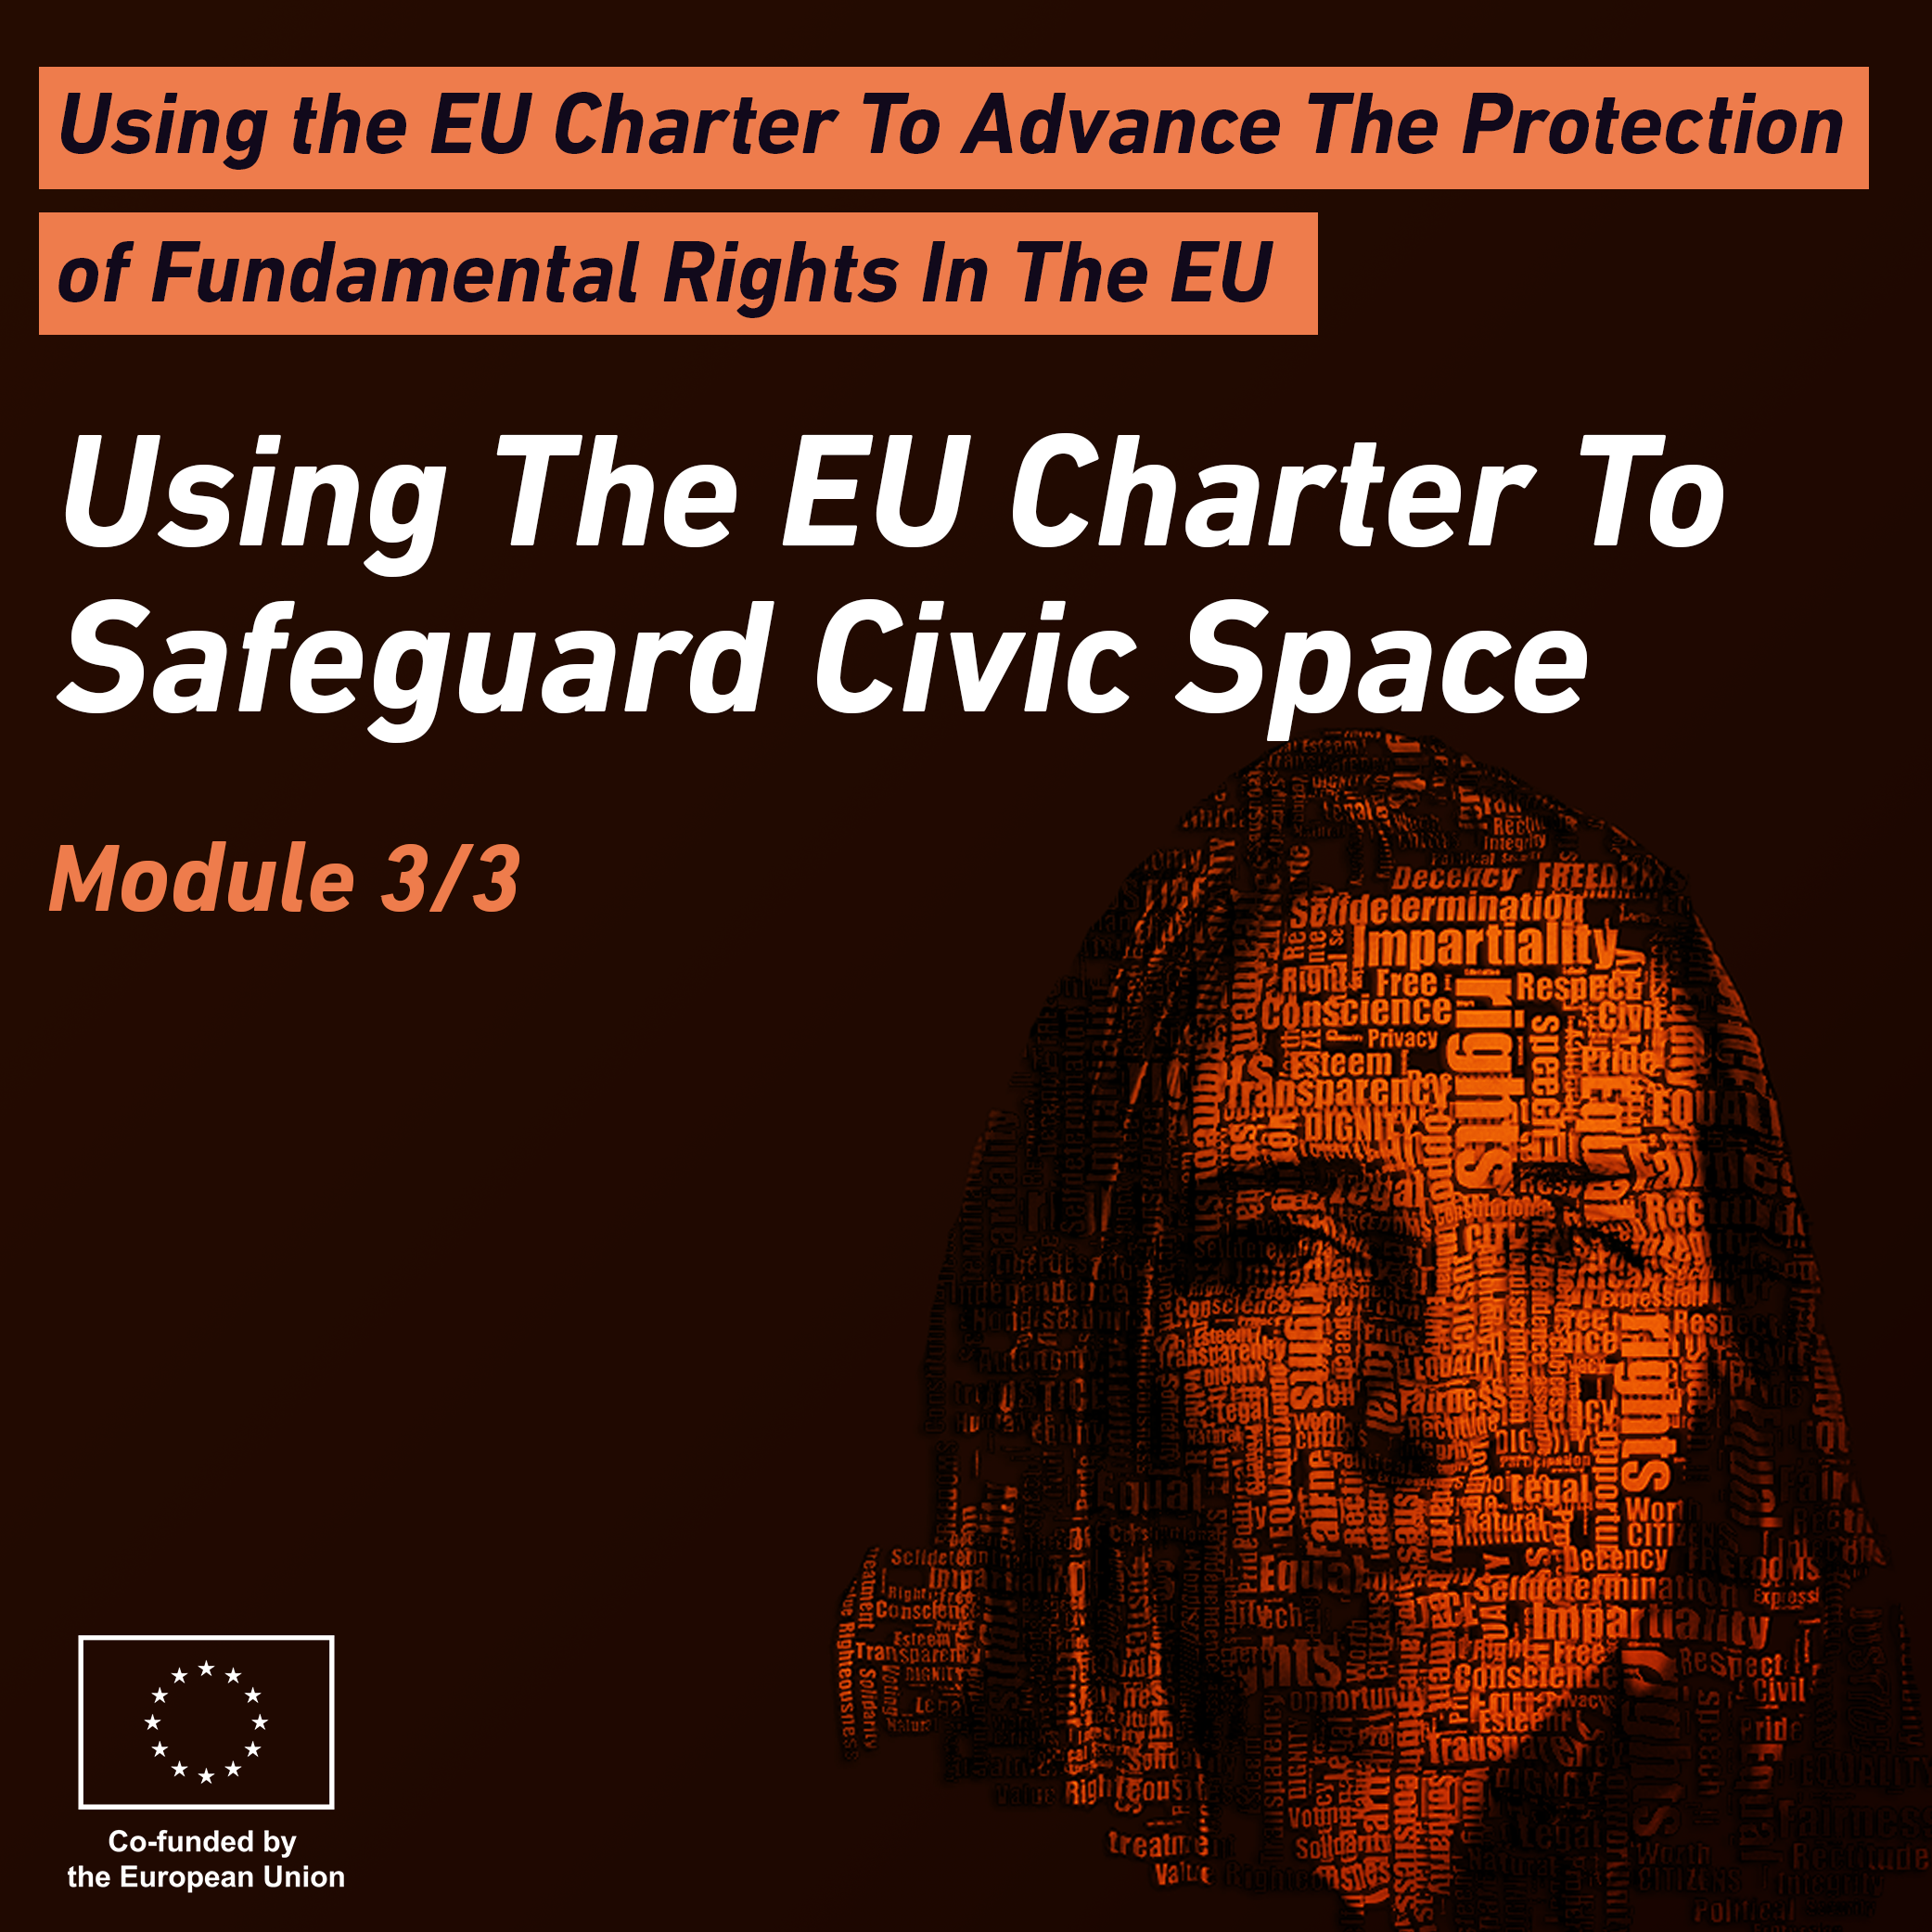 Using the EU Charter to Advance the Protection of Fundamental Rights in the EU - Module 3 LIB011